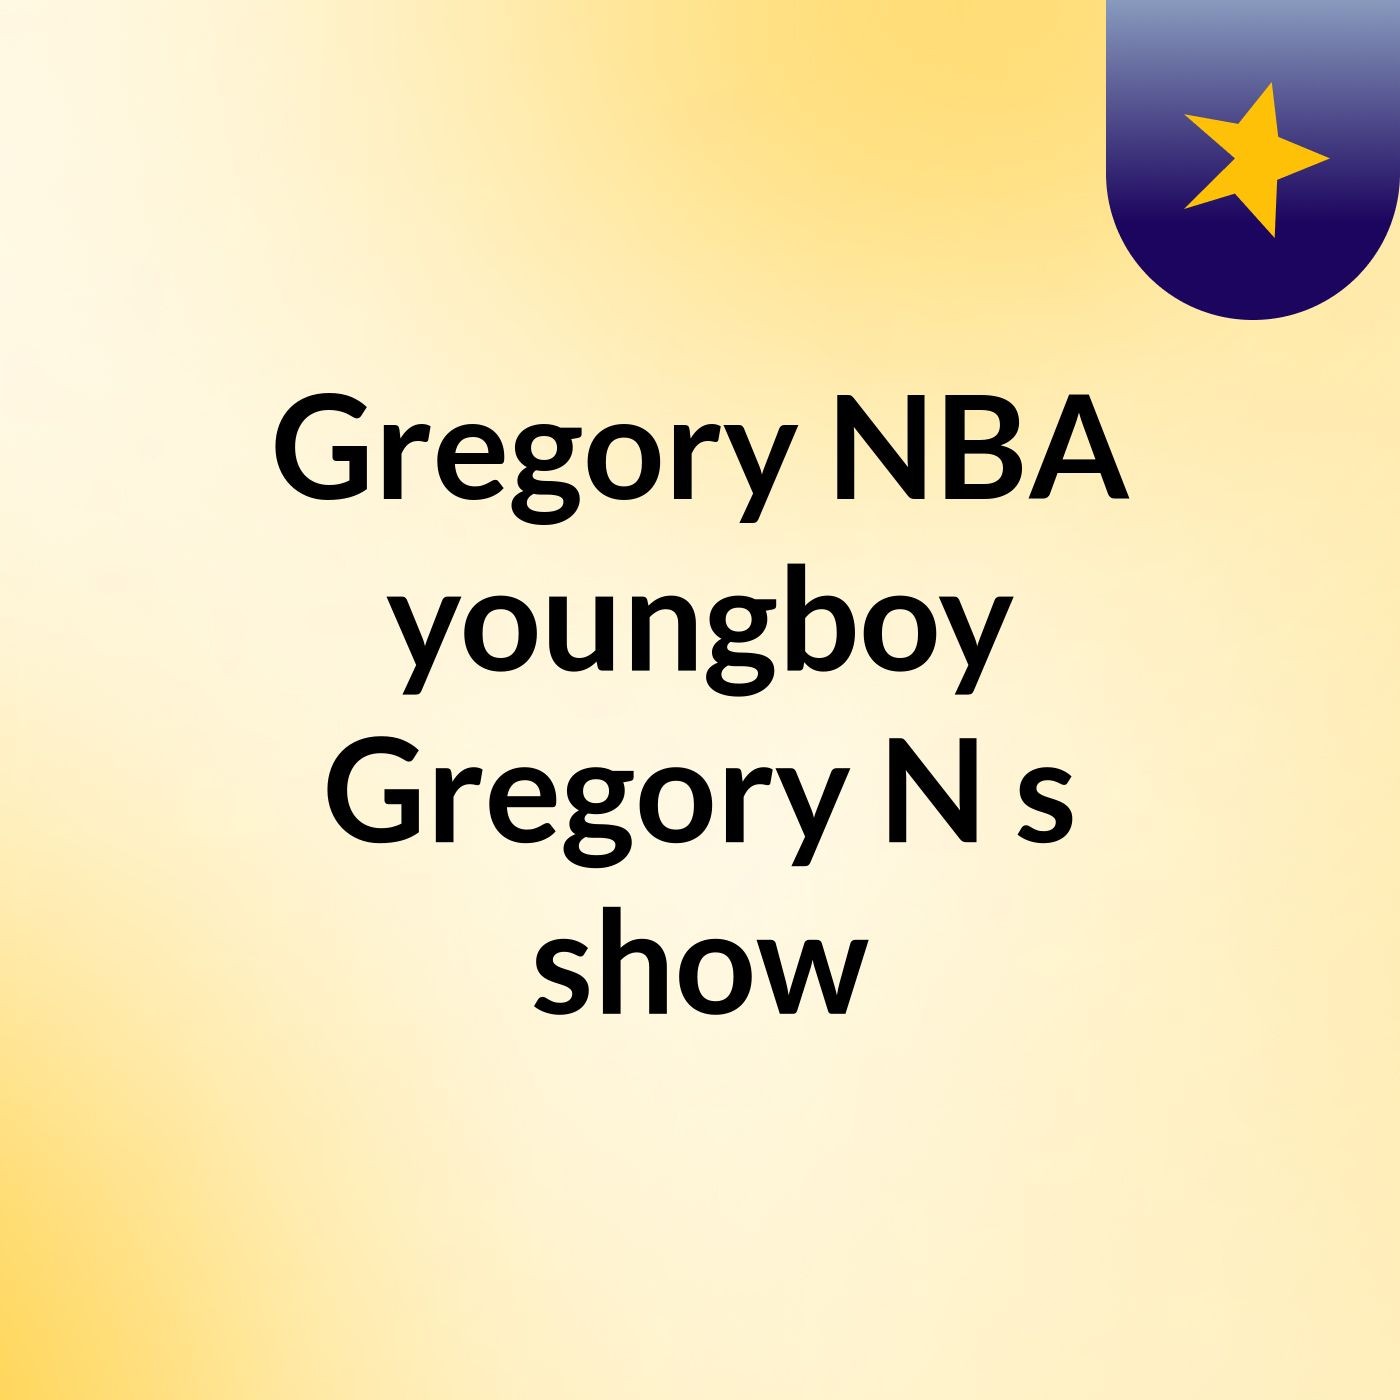 Episode 3 - Gregory NBA youngboy Gregory N's show